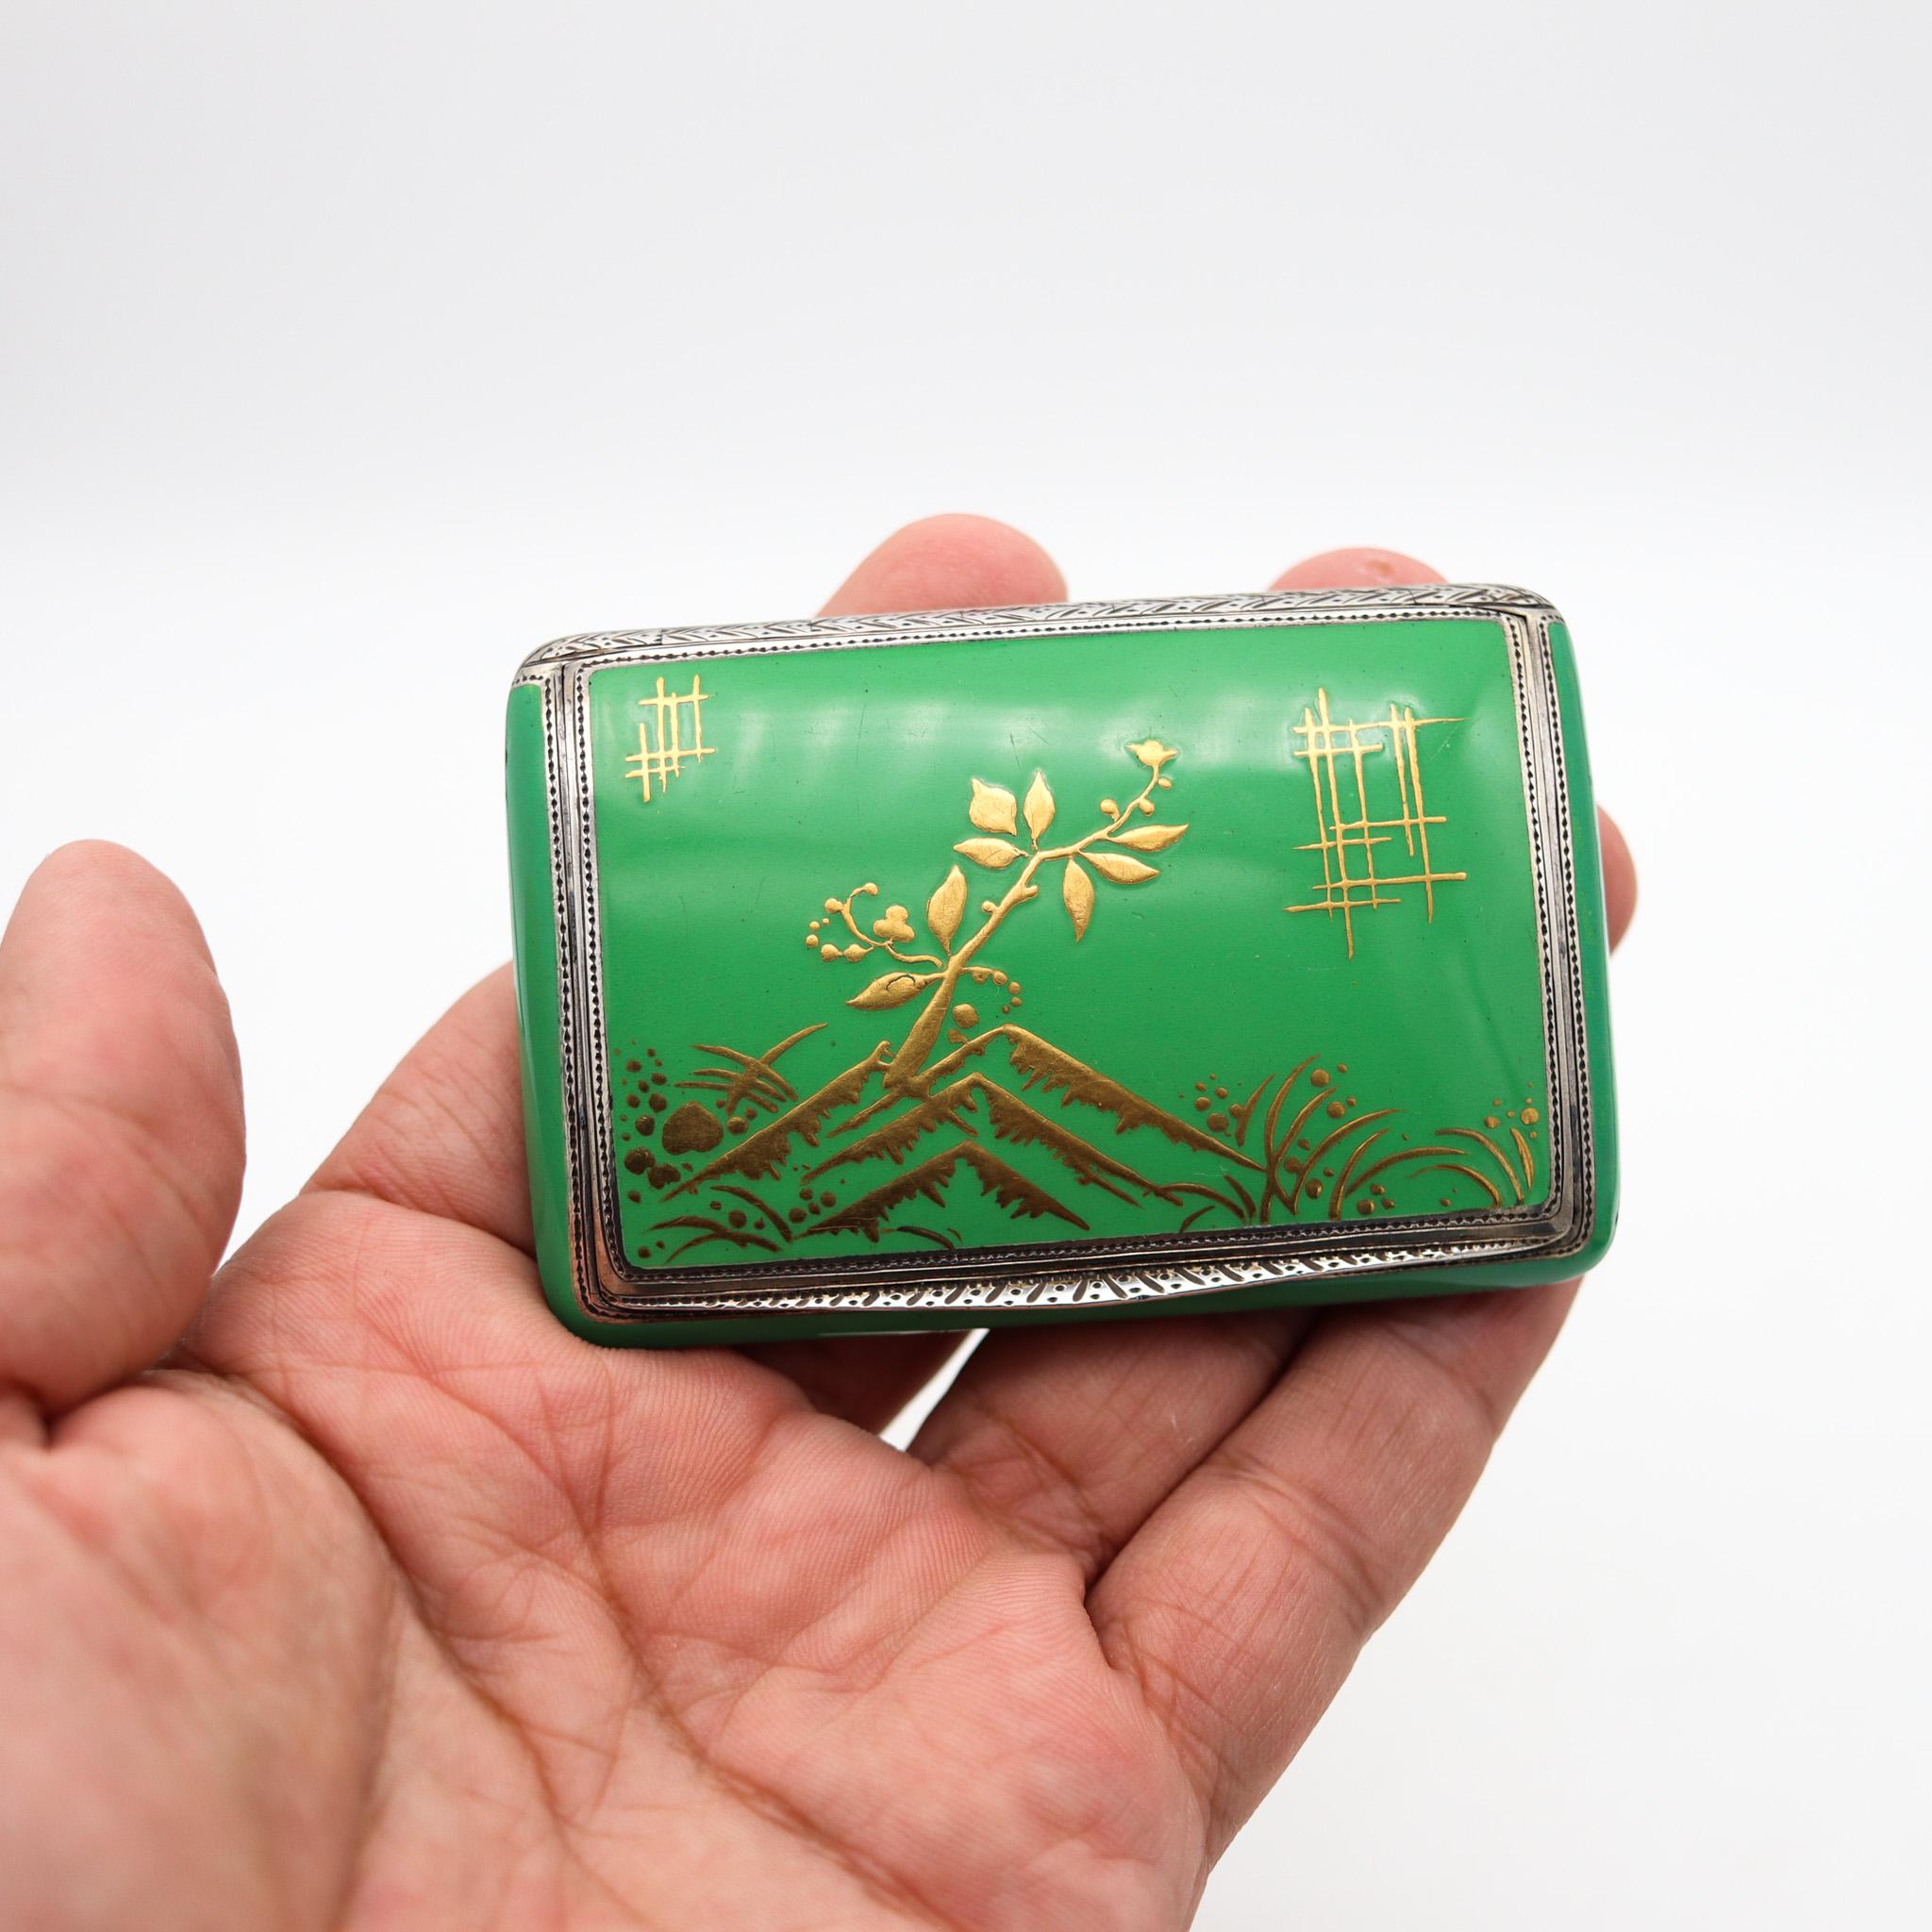 Dunhill Paris 1928 By Louis Kuppenheim Enameled Chinoiserie Box In 935 Sterling  1